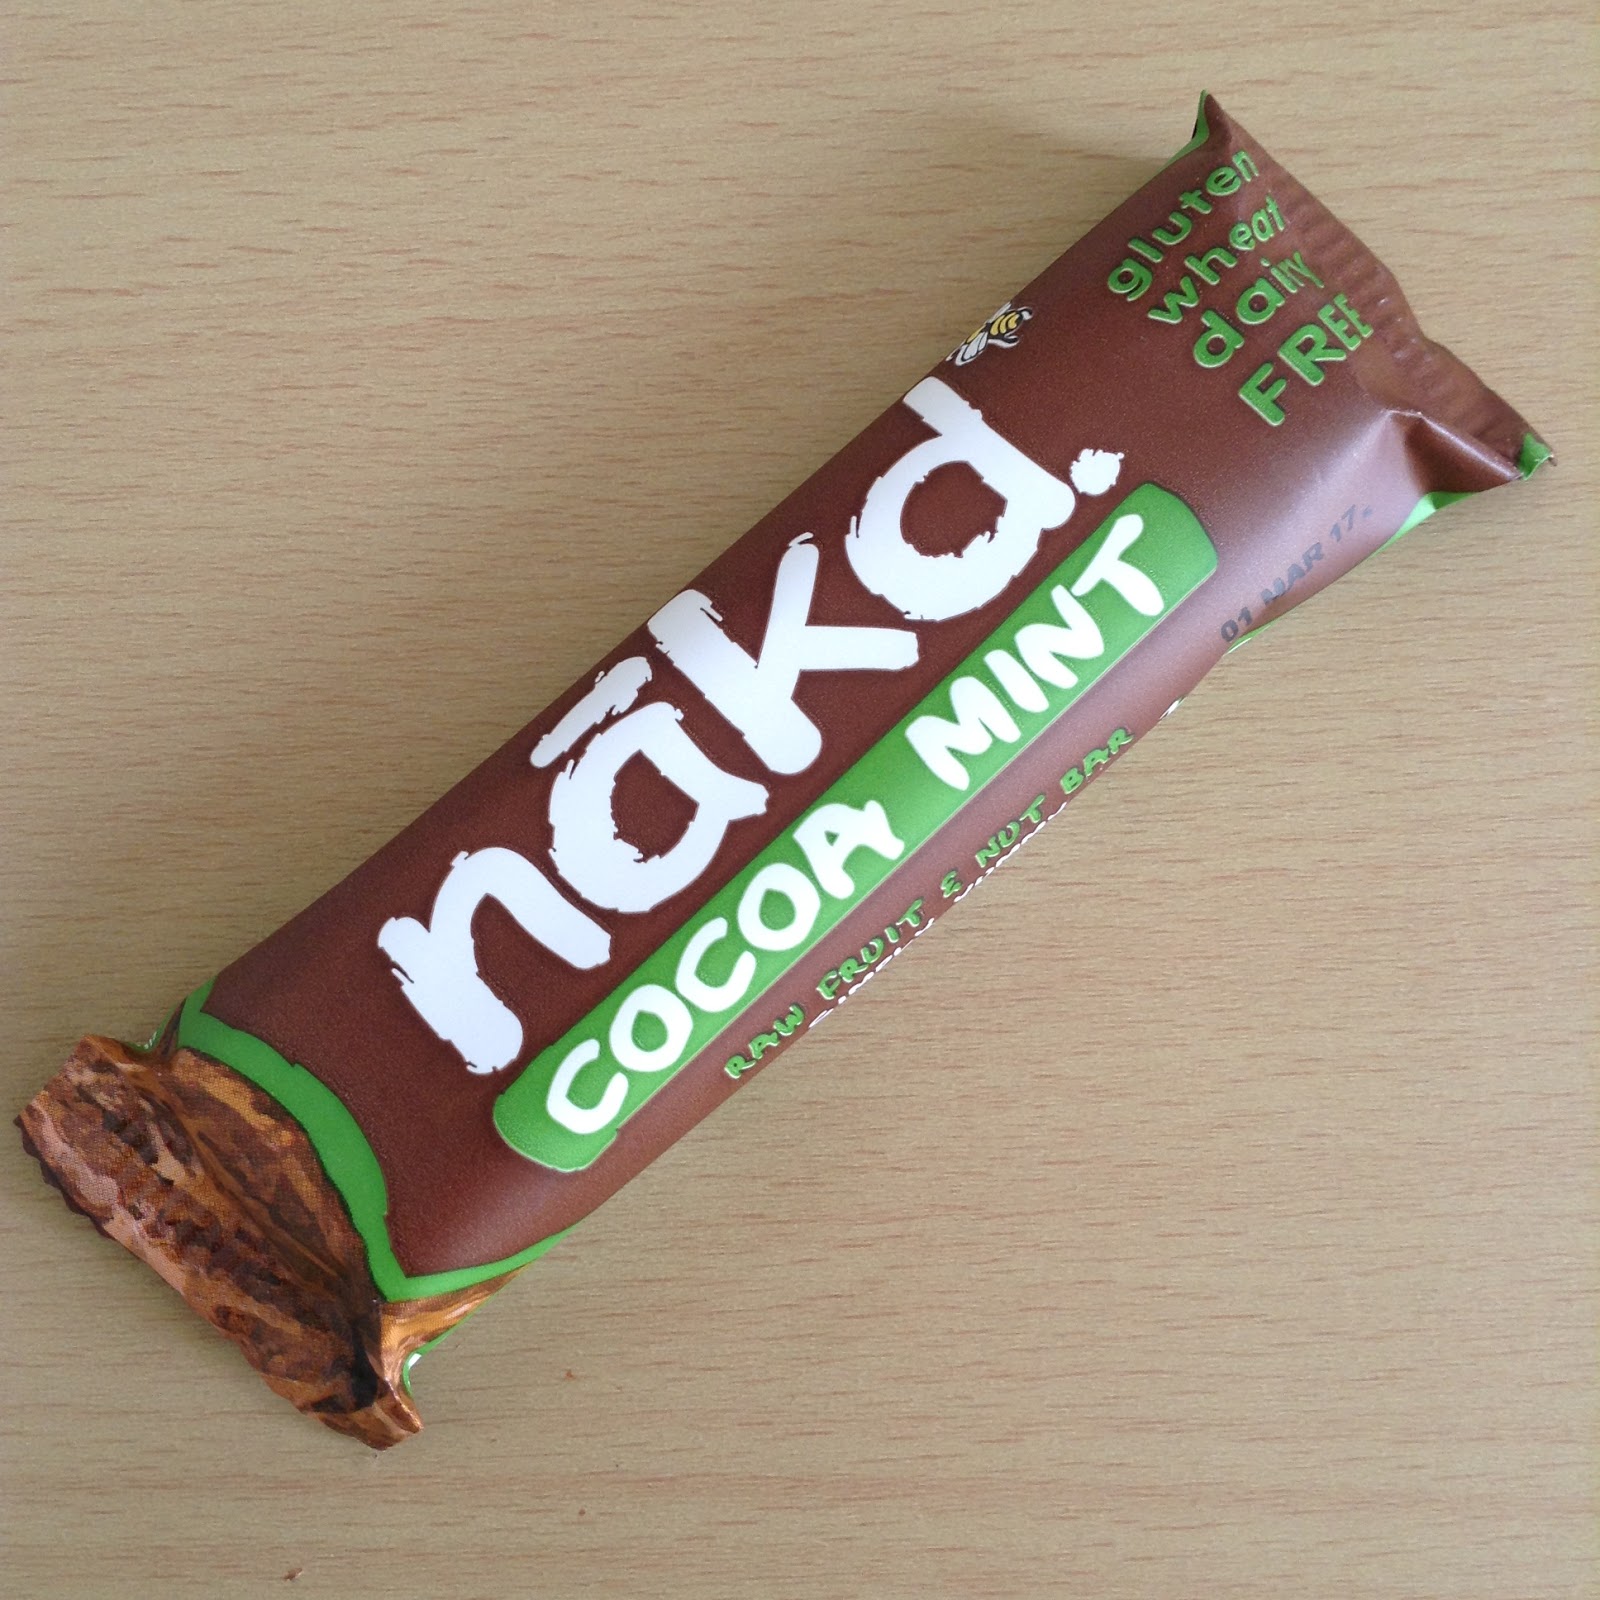 Healthy snack brand Nakd launches Protein Bars and Big Bars